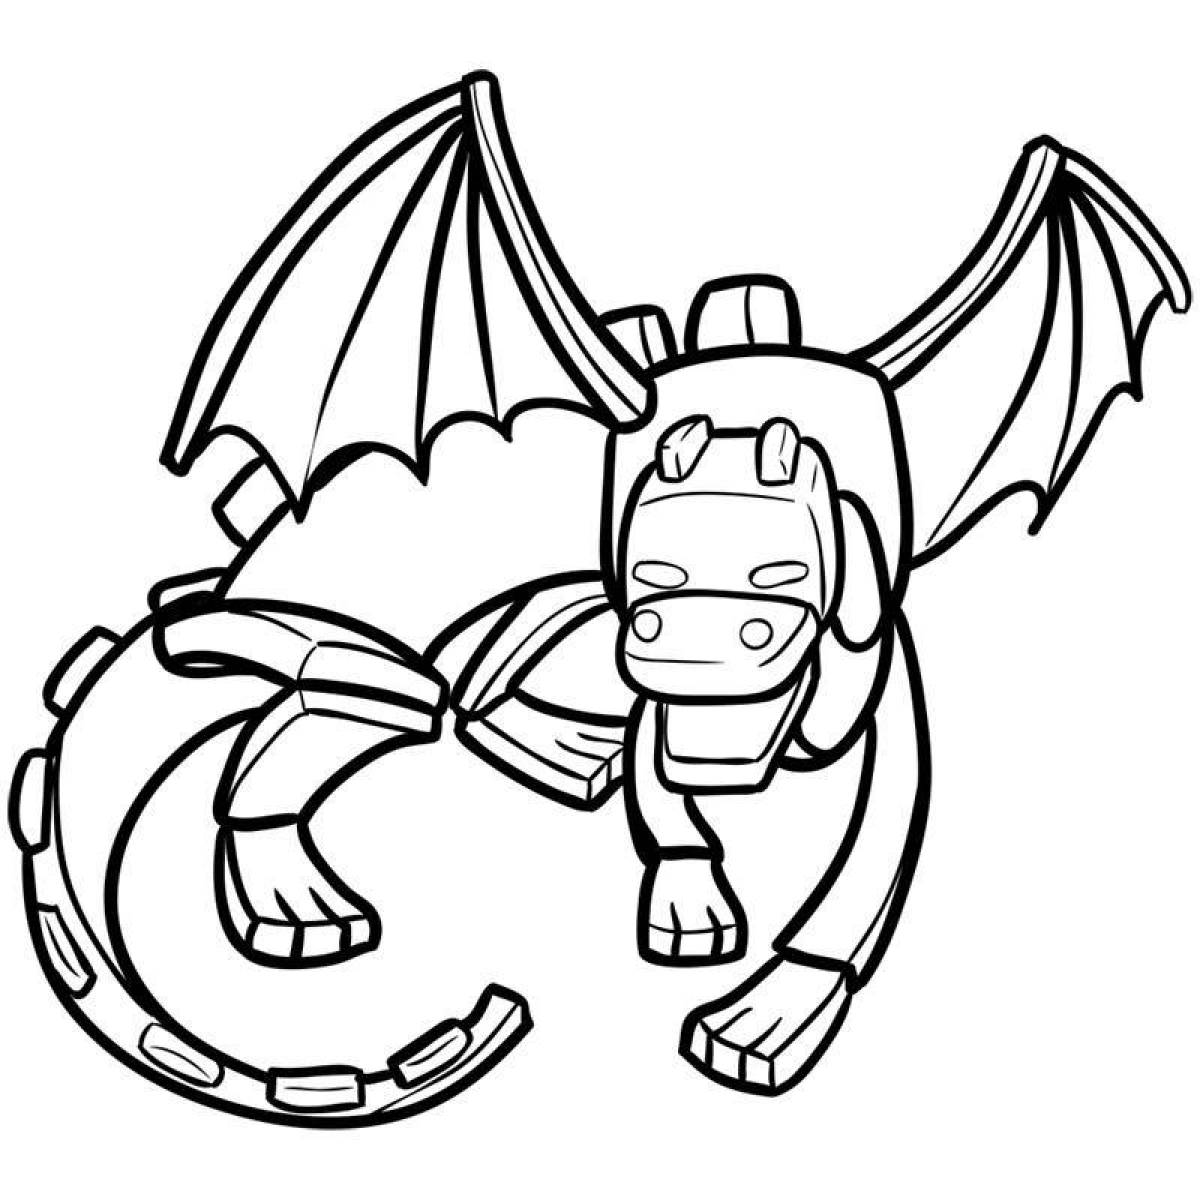 Coloring page dazzling ender dragon